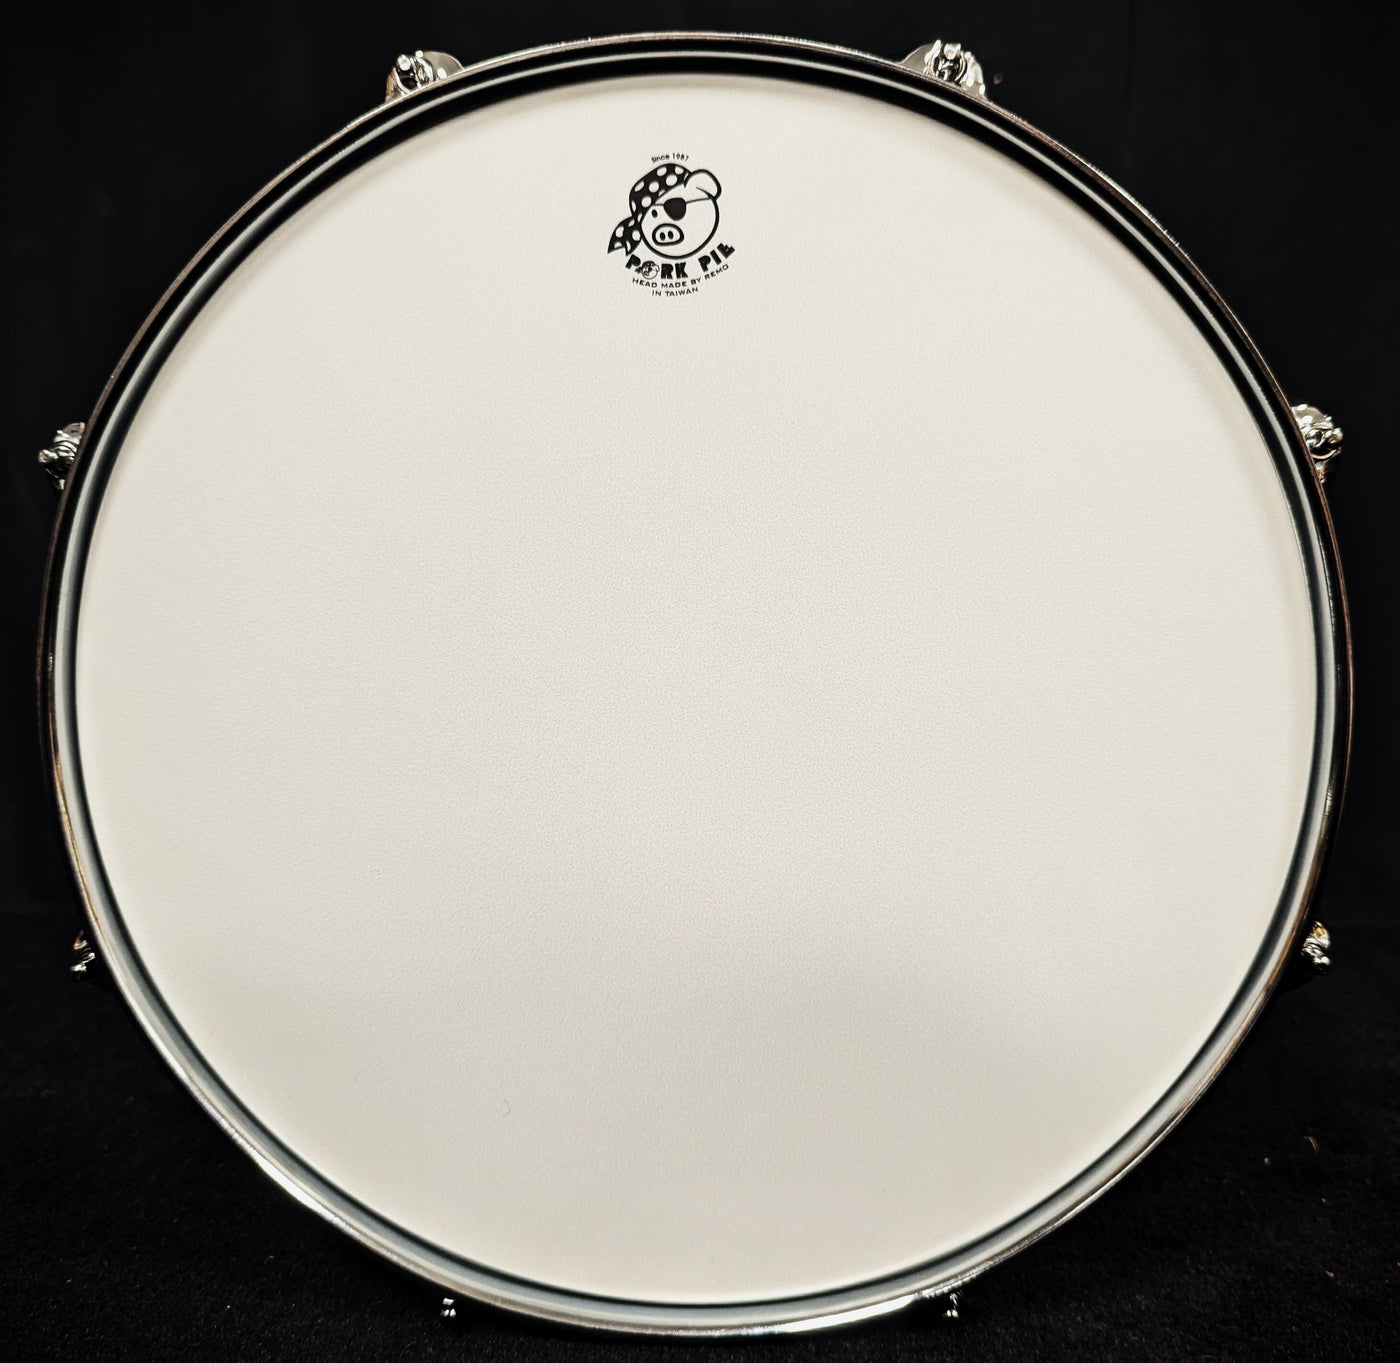 Hip Pig Blue Silver Duco Snare